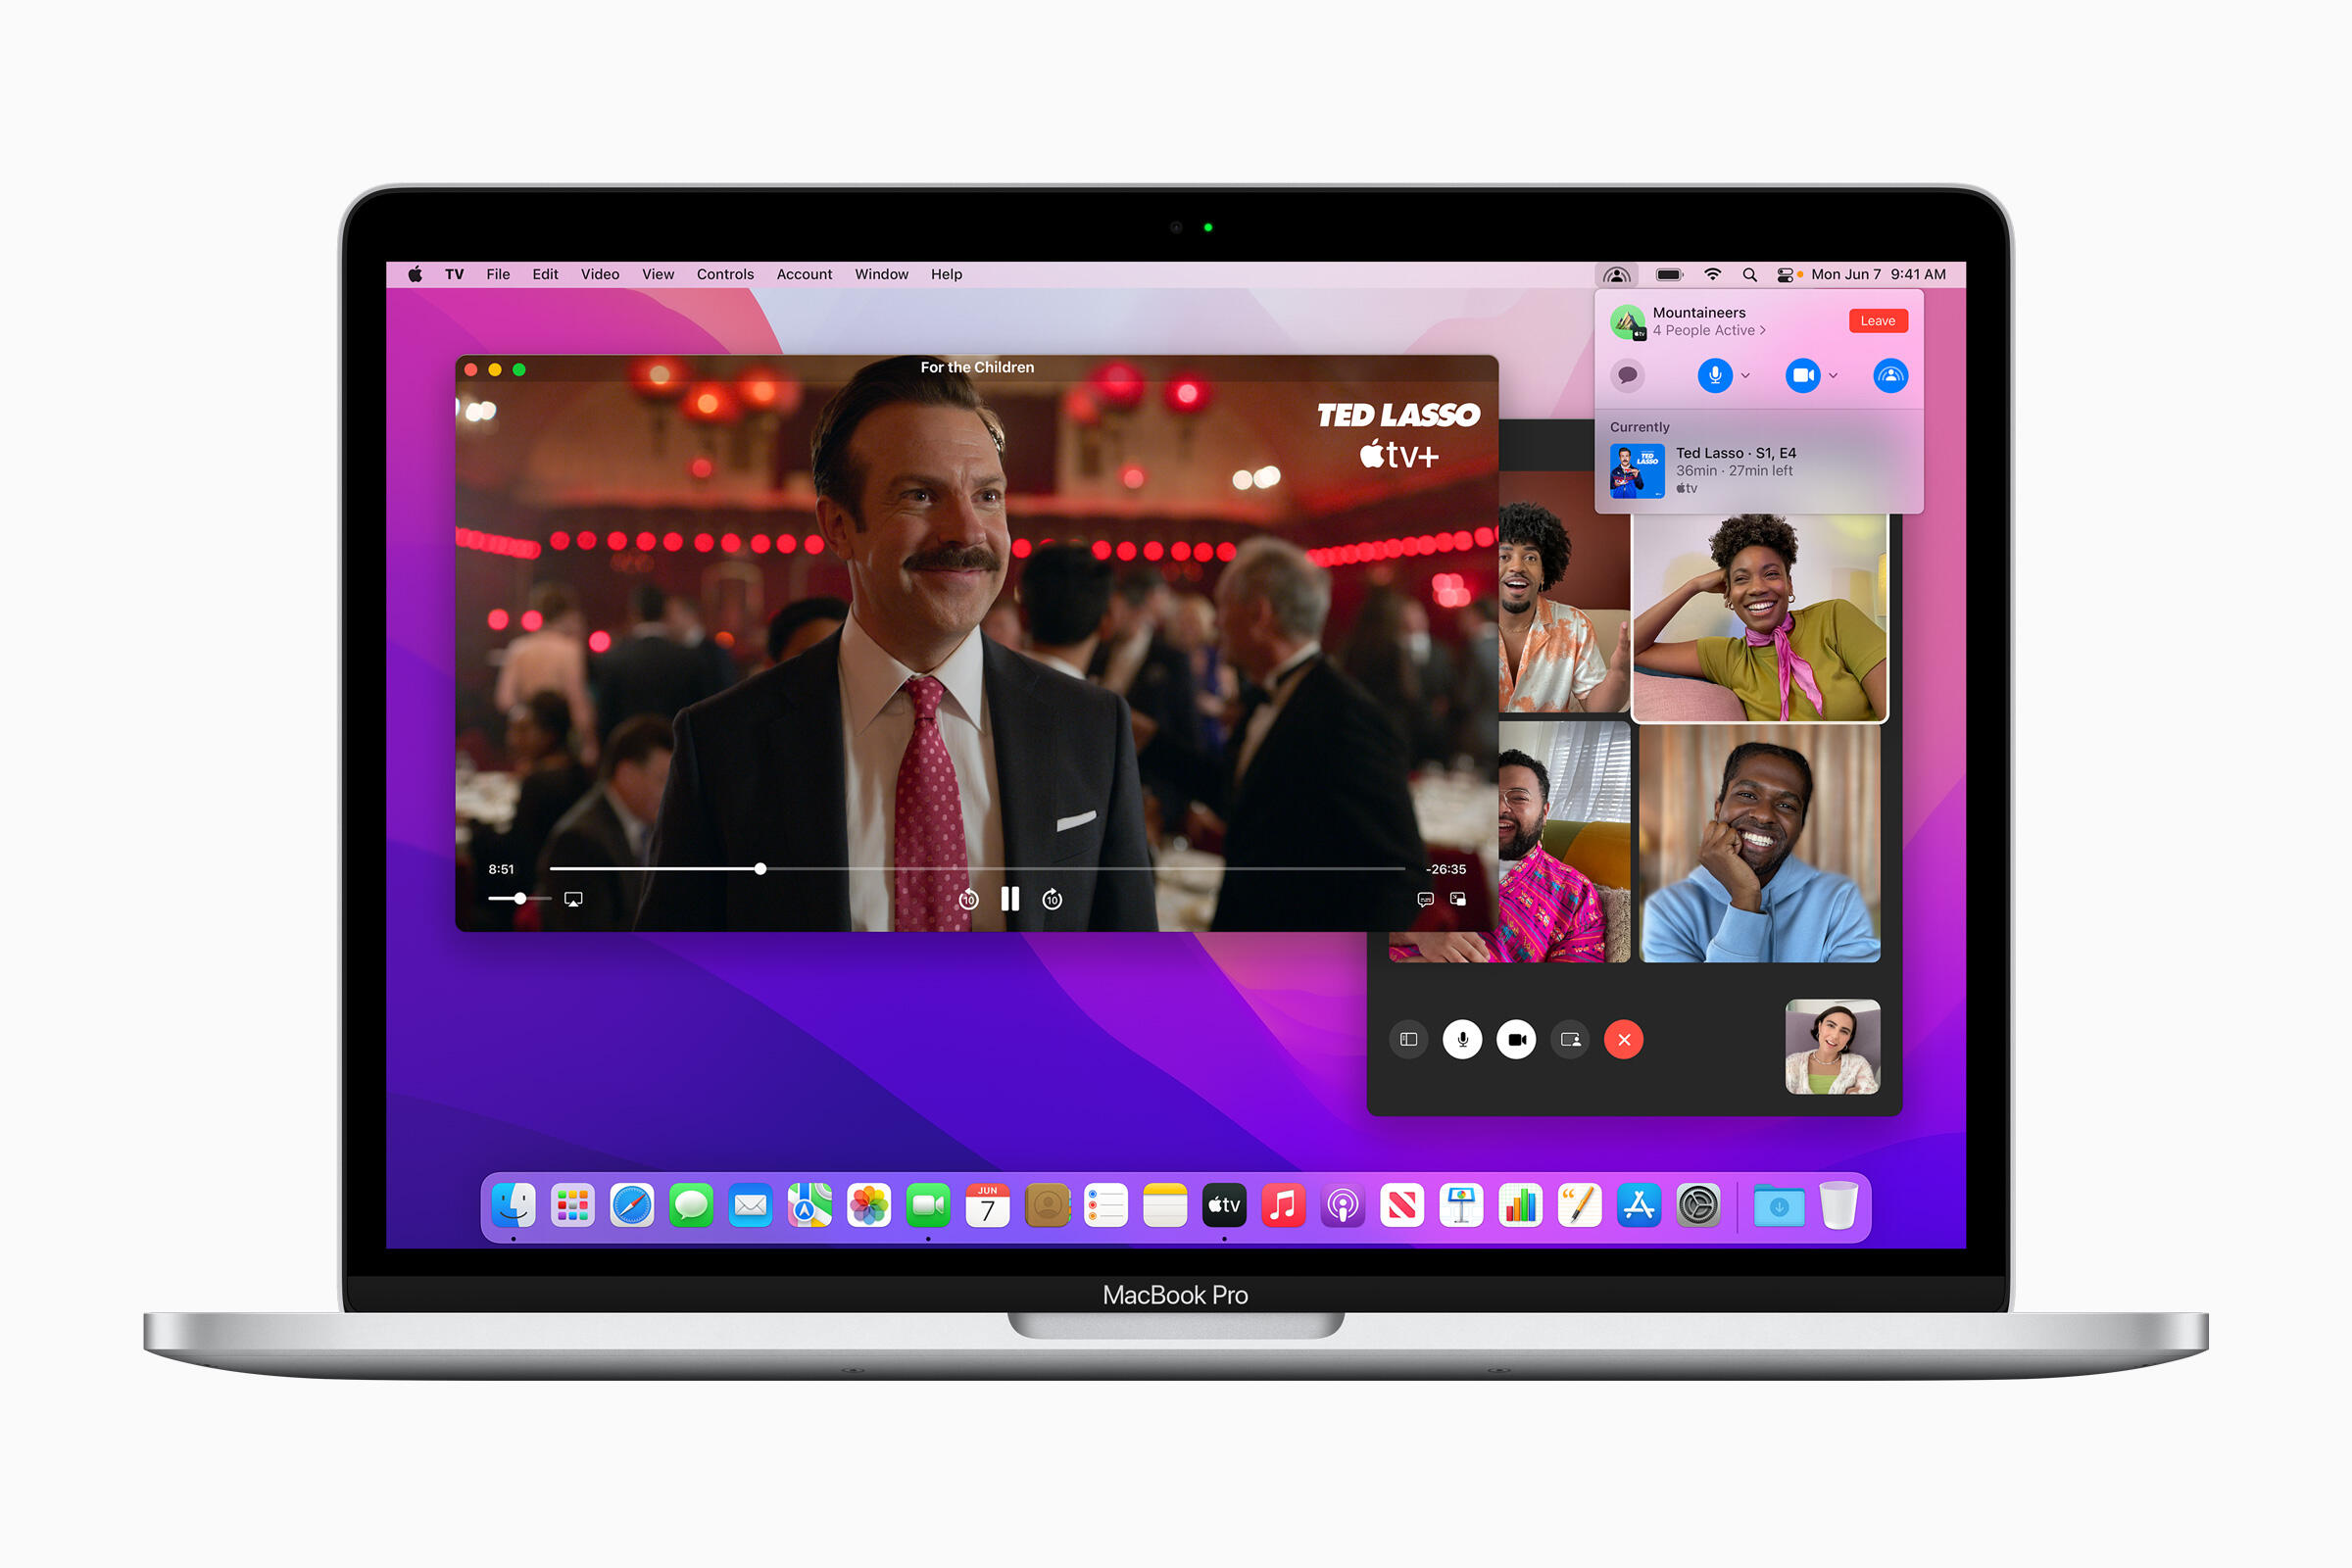 Facetime on macOS Monterey